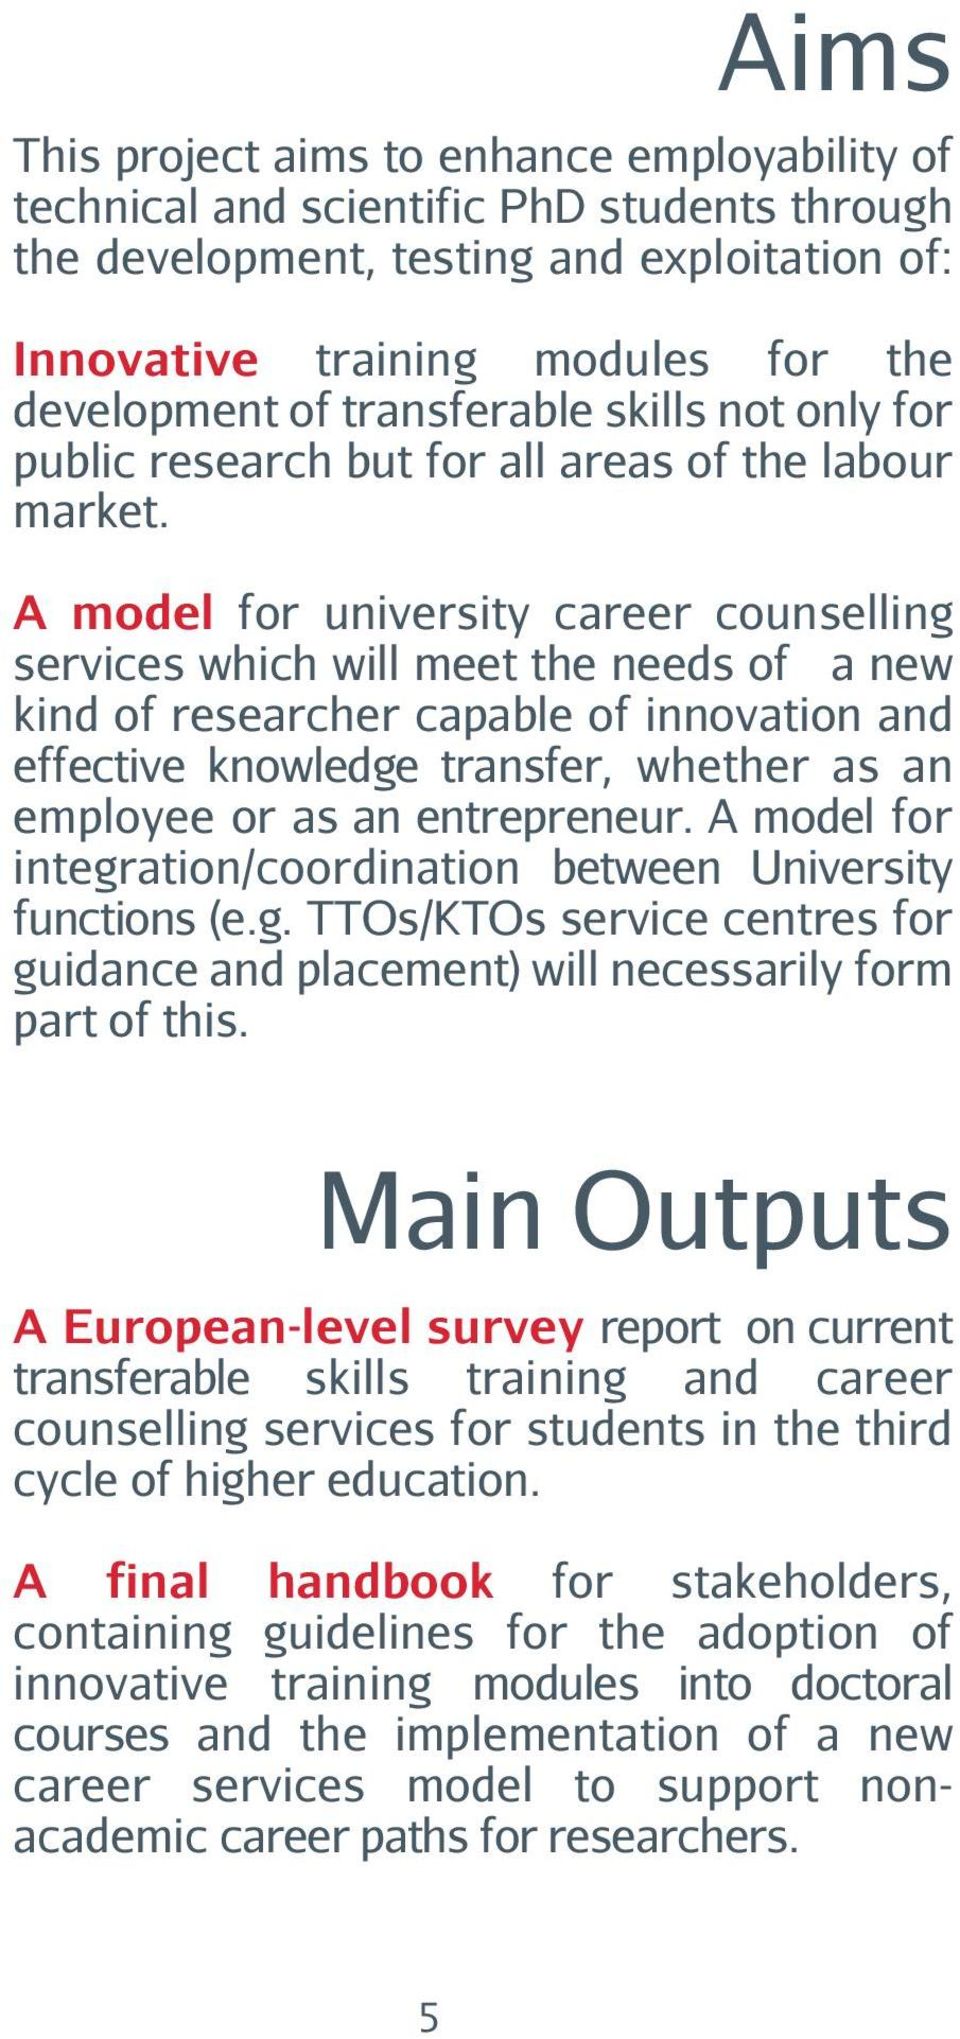 A model for university career counselling services which will meet the needs of a new kind of researcher capable of innovation and effective knowledge transfer, whether as an employee or as an